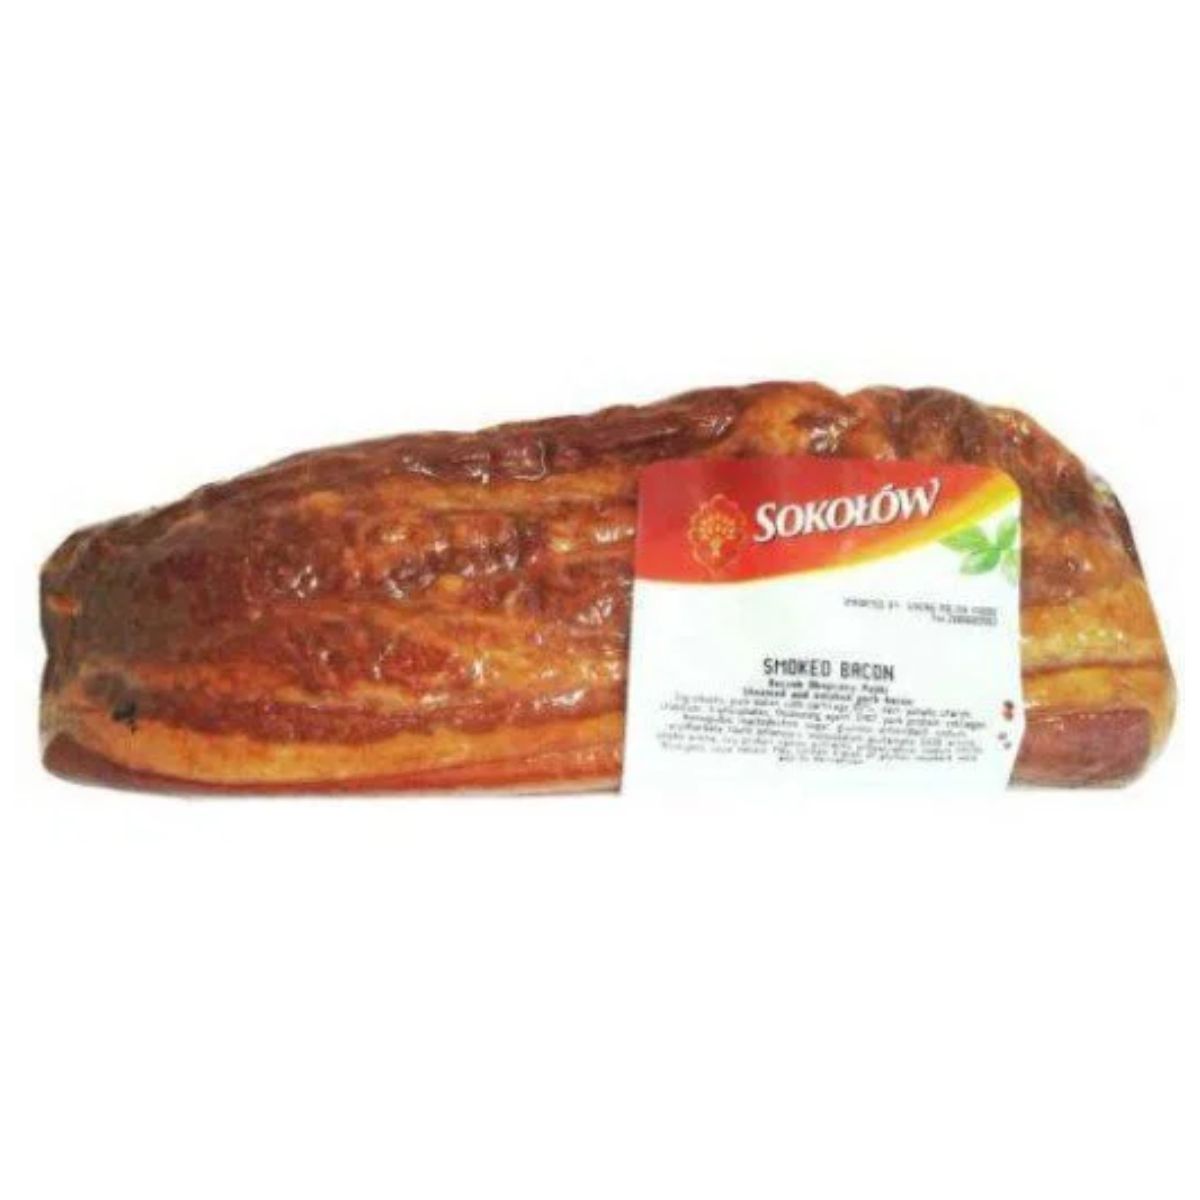 A piece of Sokolow - Smoked Bacon- with a label on it.